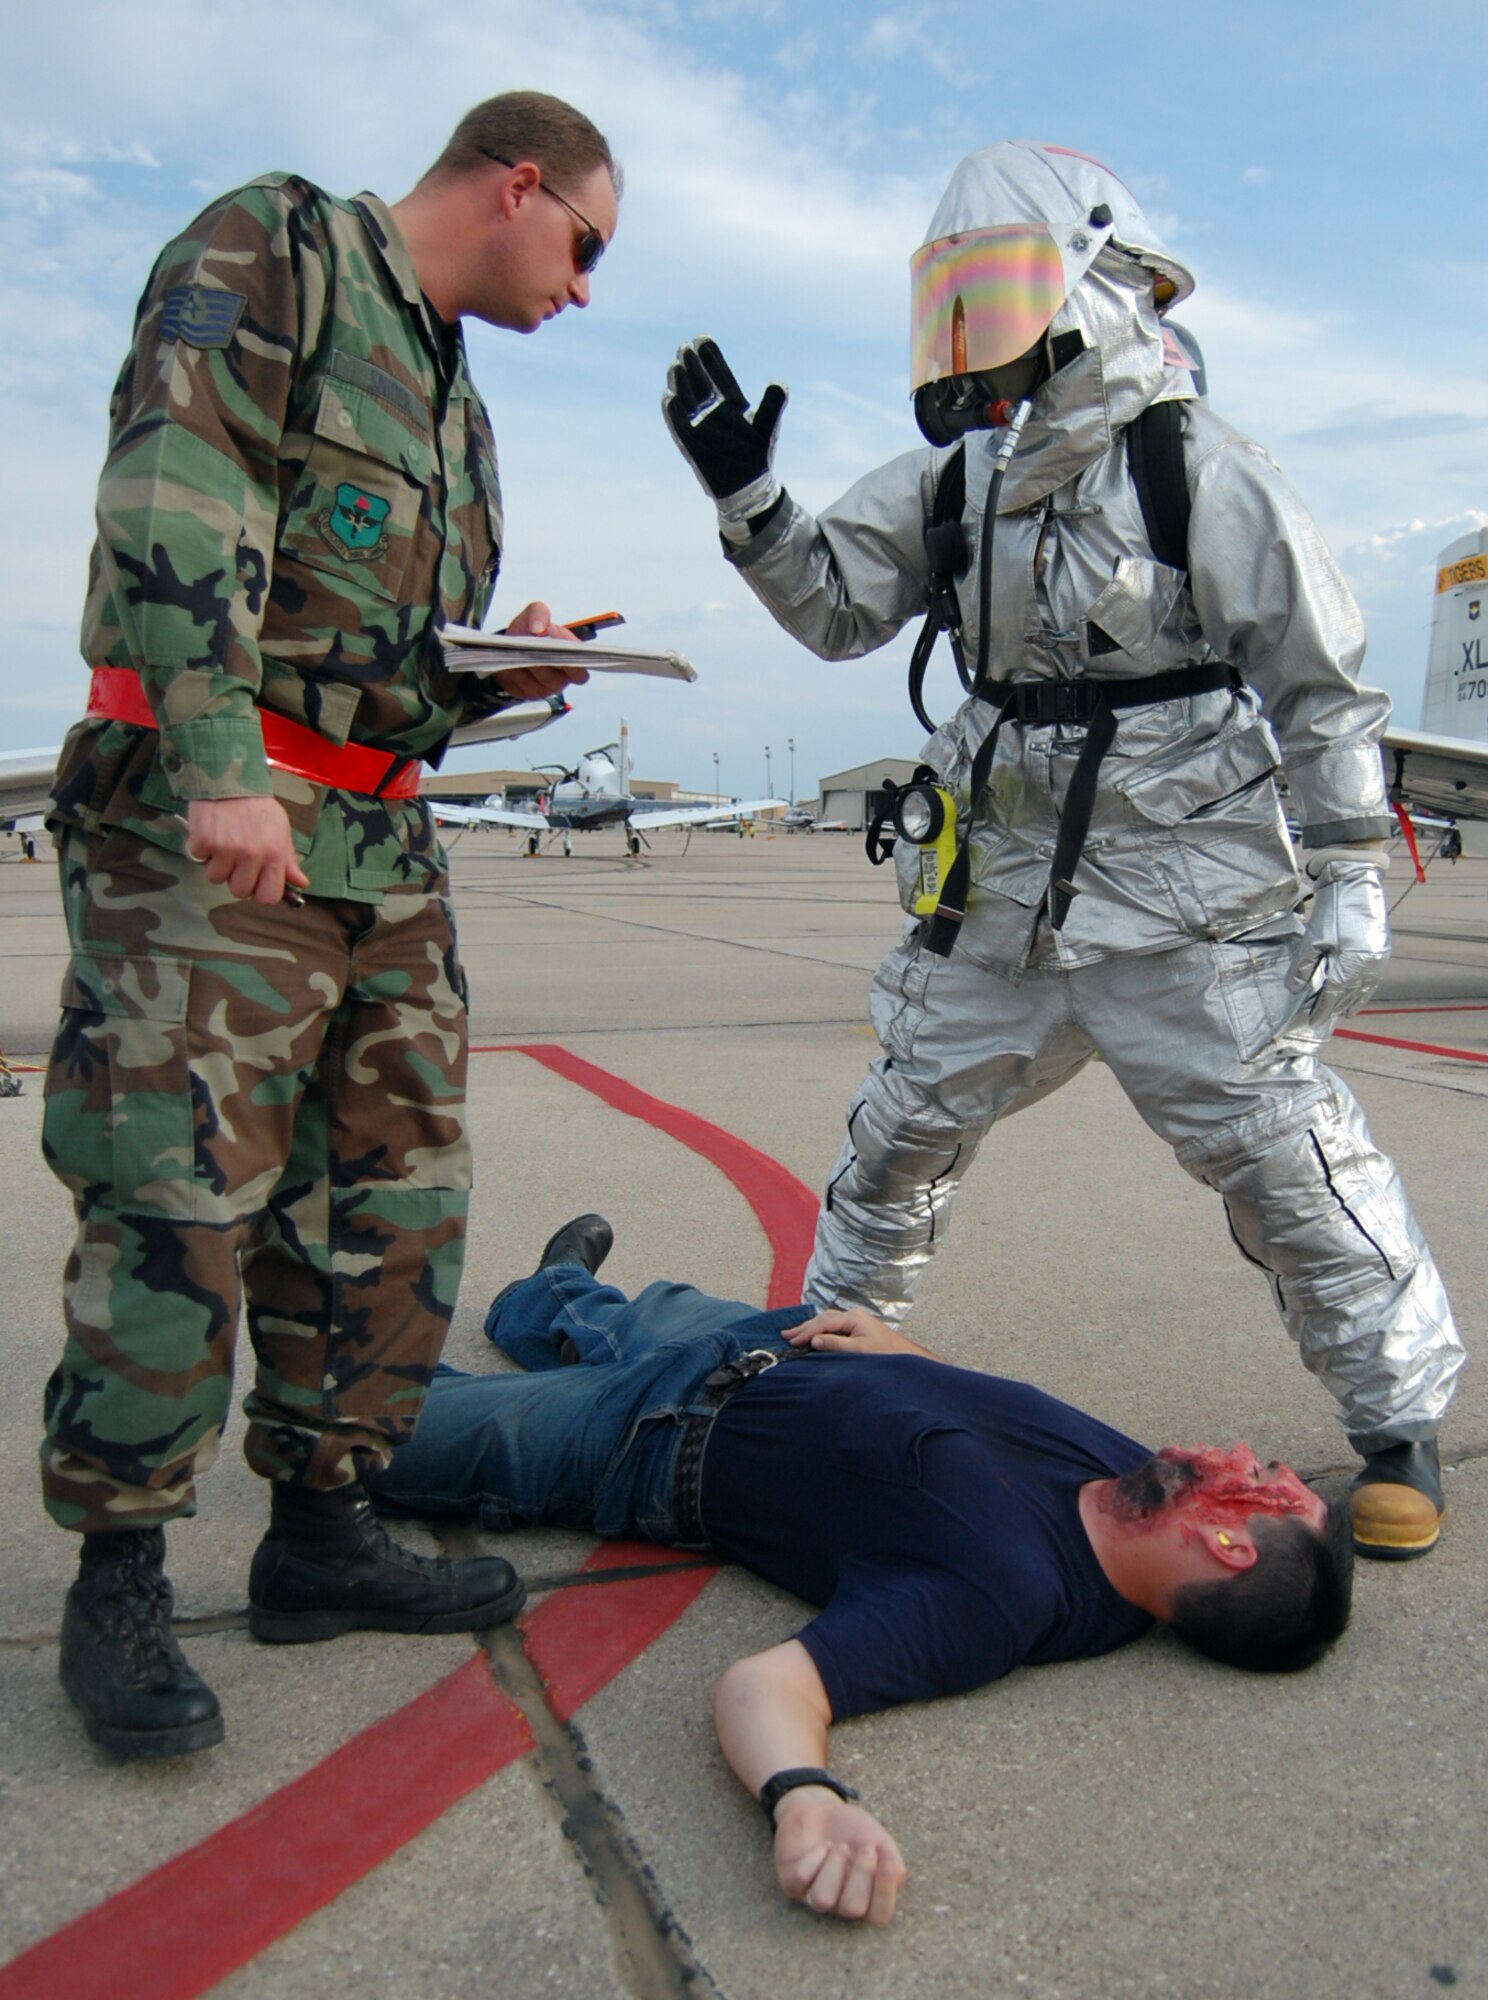 LAUGHLIN AIR FORCE BASE, Texas – A firefighter from the 47th Installation Support Squadron reacts to inputs from Tech. Sgt. Randy Snider, 47th Medical Group Exercise Evaluation Team member, during an exercise here Sept. 24.  Laughlin routinely practices responding to various emergency situations to ensure base personnel are prepared to handle any situation.  (U.S. Air Force photo by Staff Sgt Austin M. May)